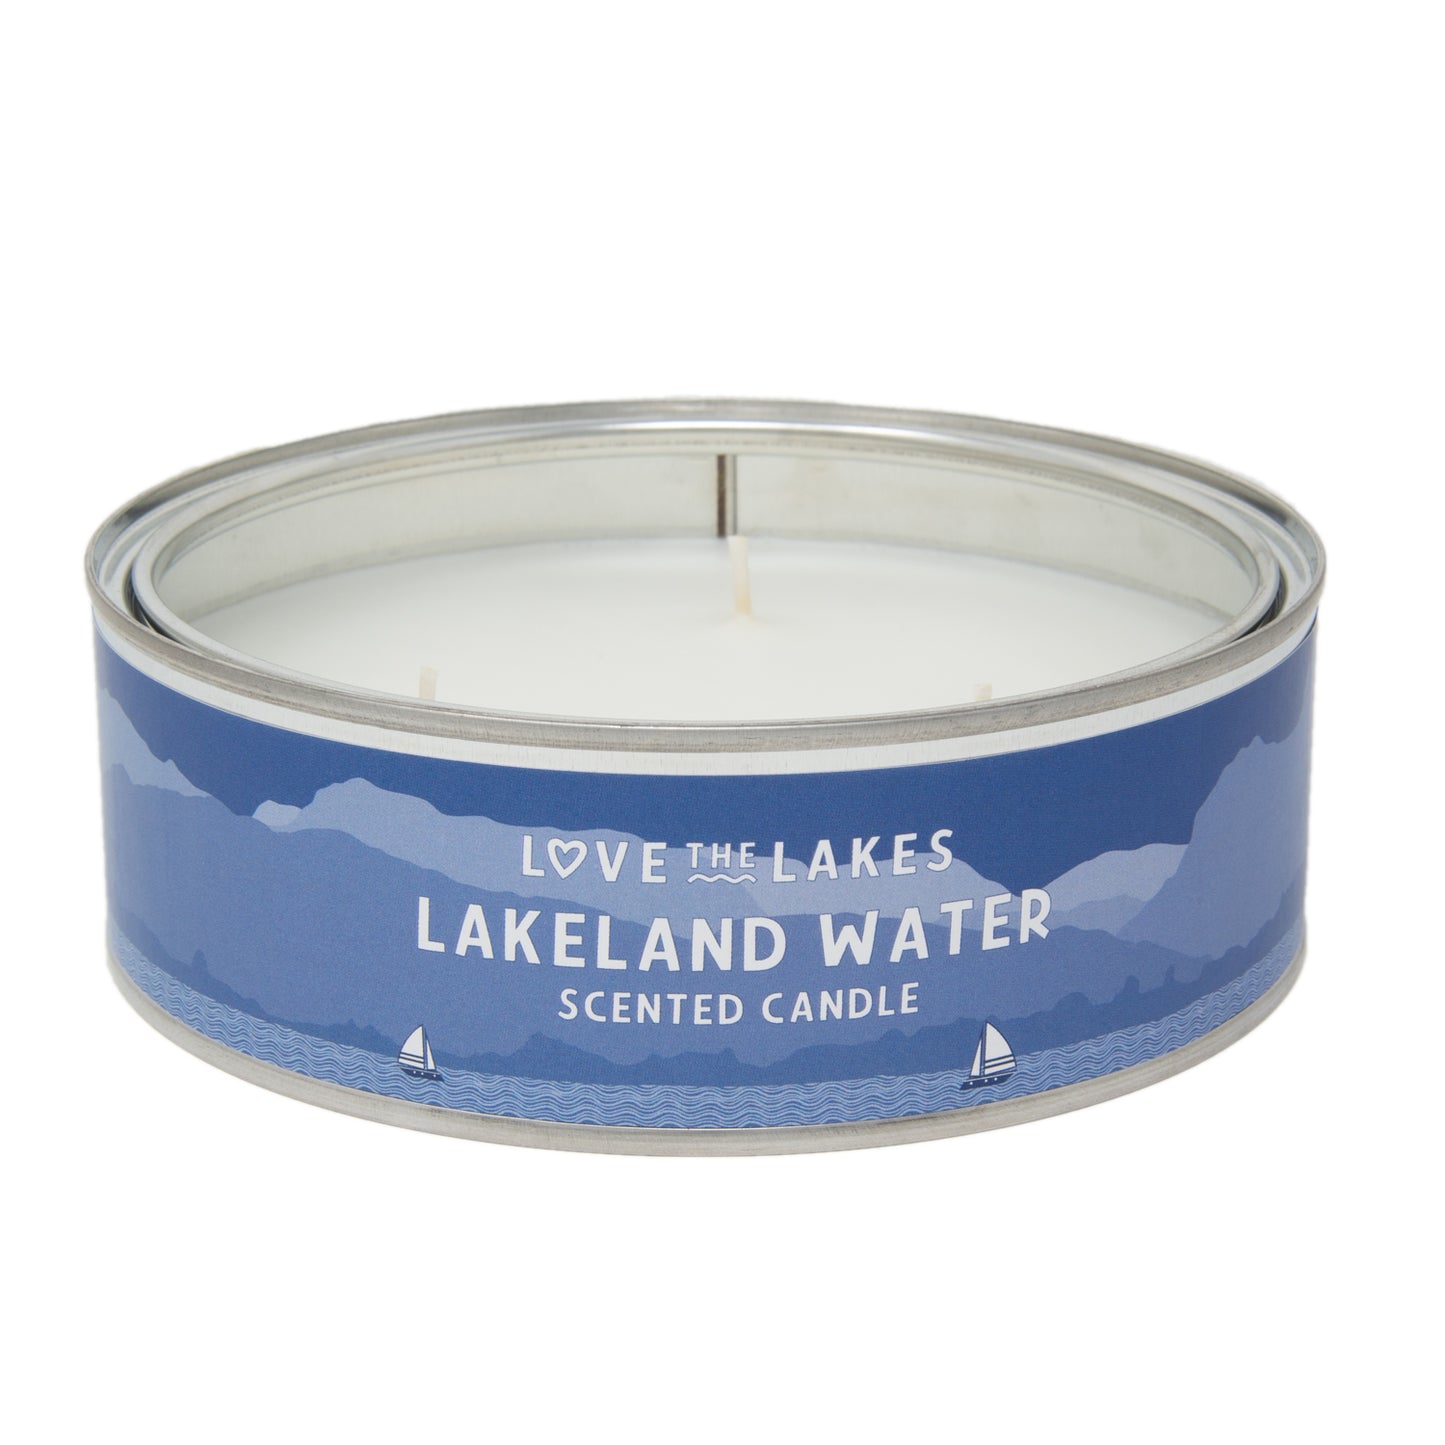 Love the Lakes Lakeland Water Candle - 3 sizes